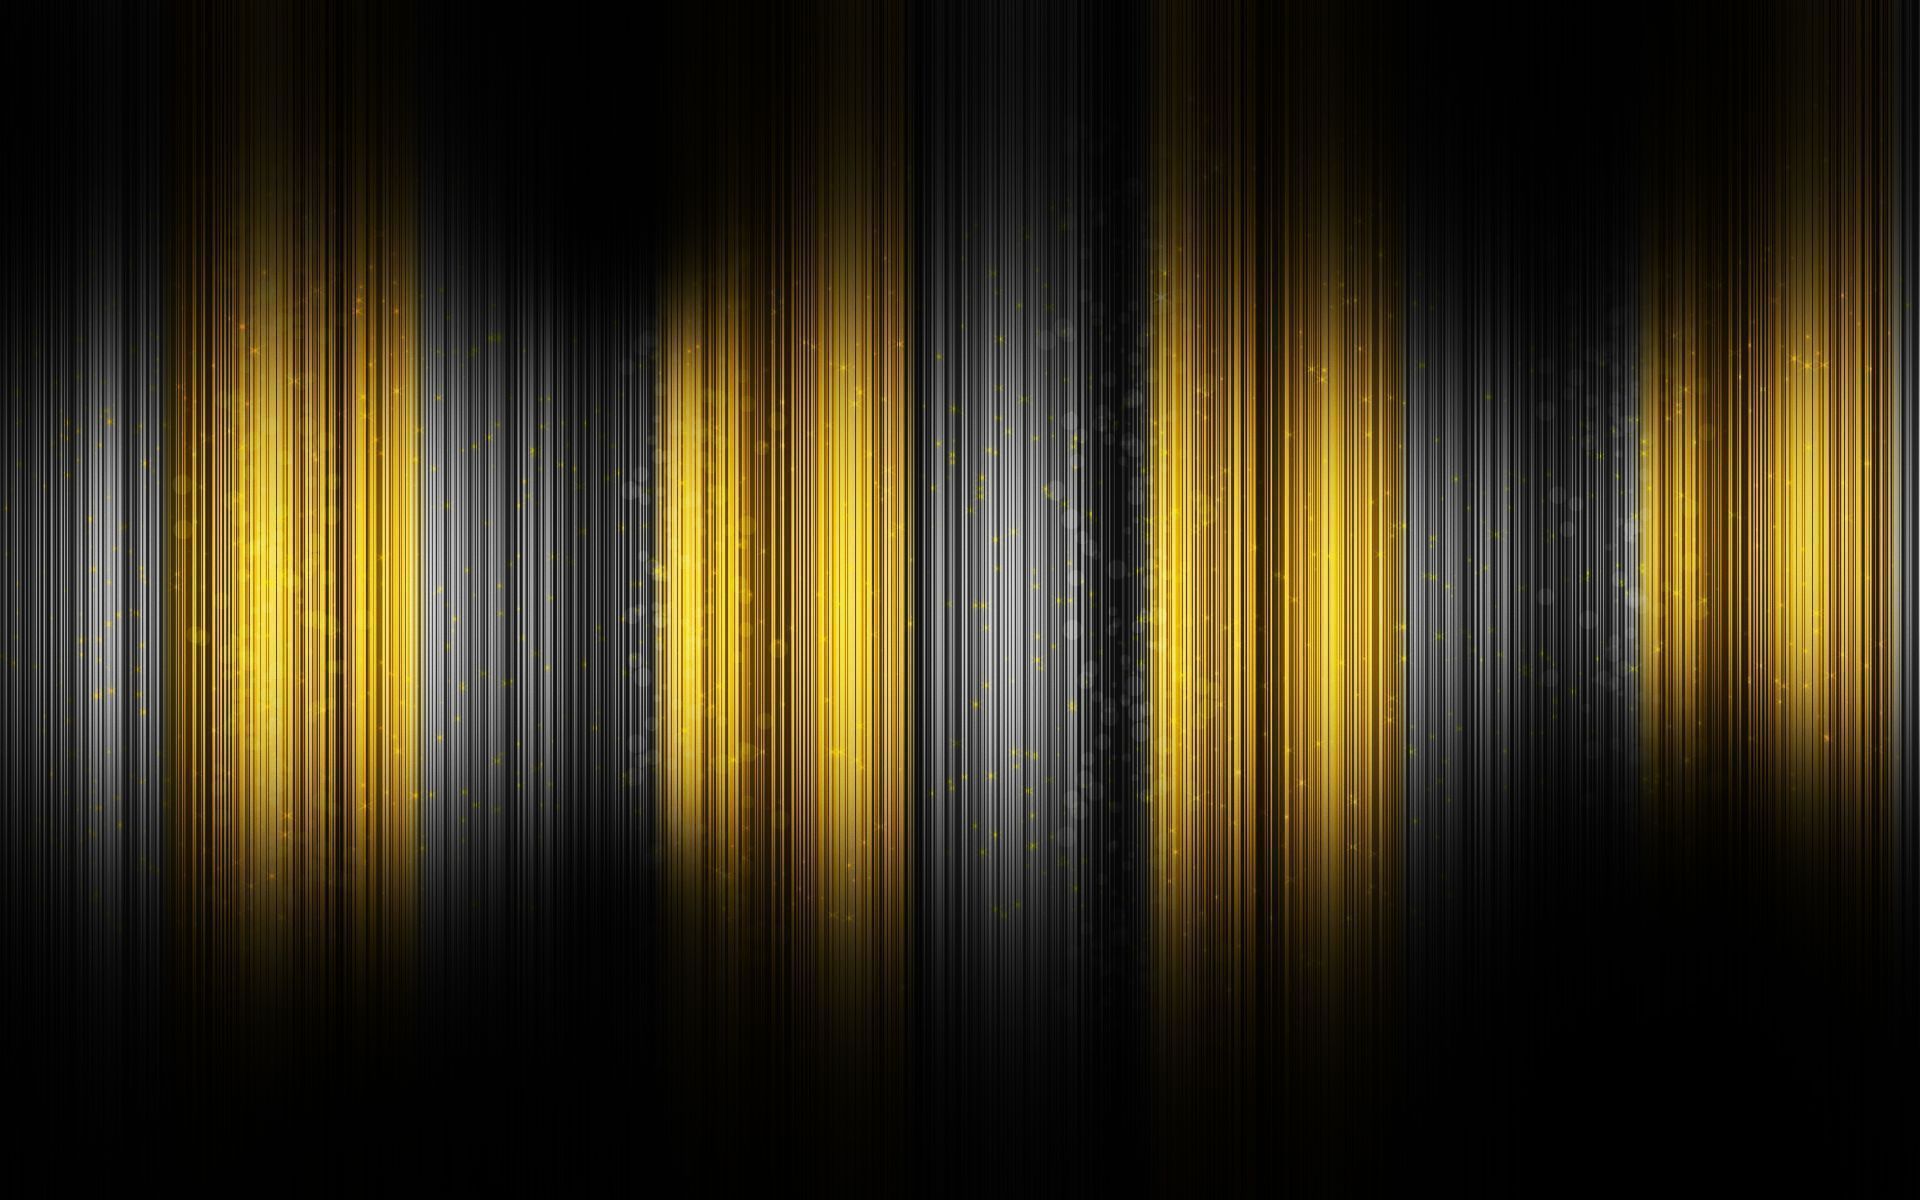 Abstract-yellow-and-black-latest-hd-wallpaper.jpg